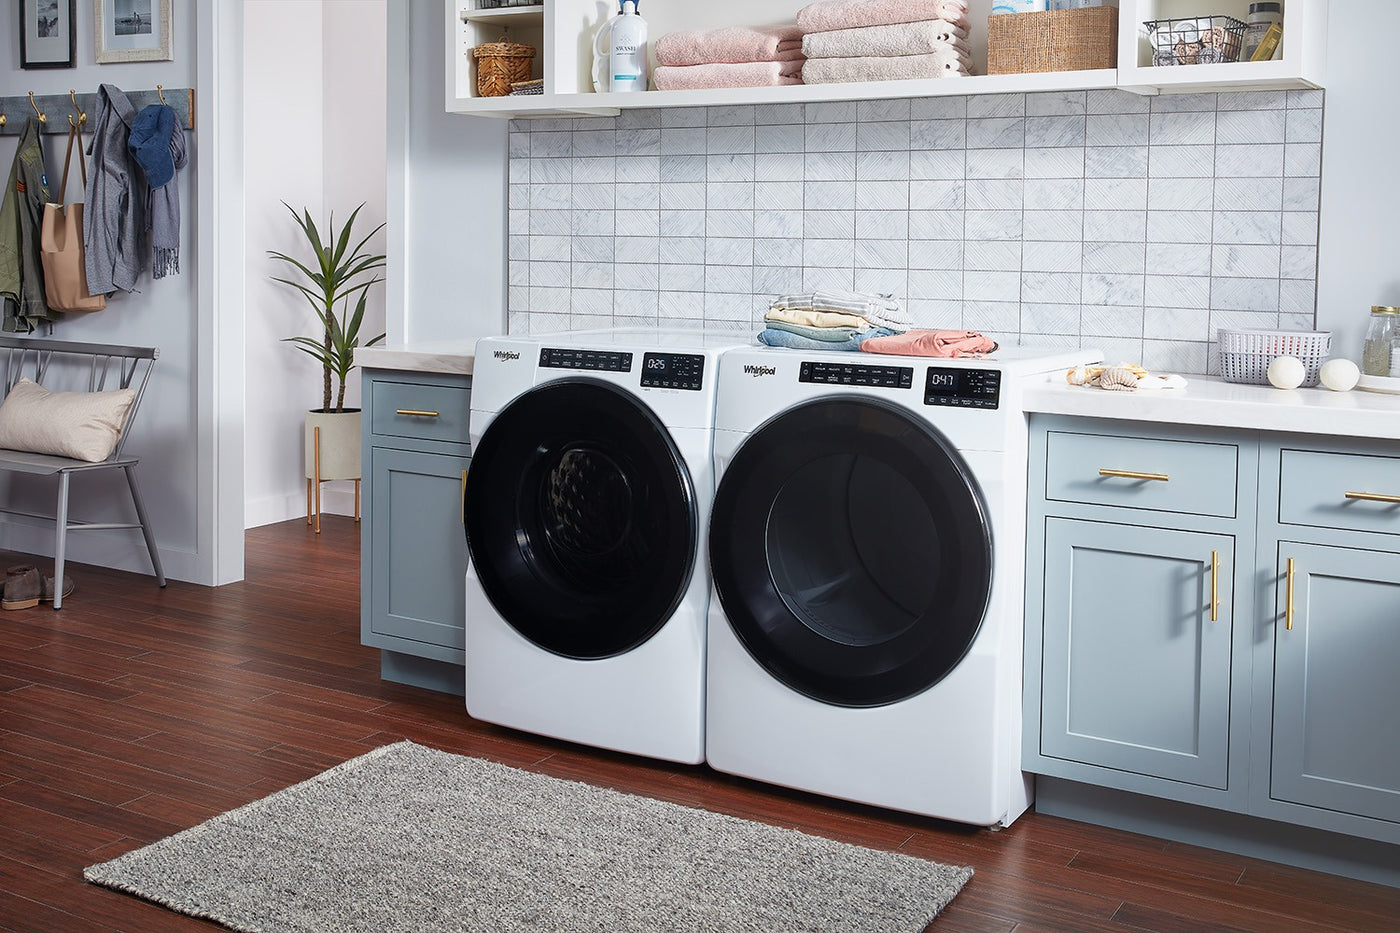 Whirlpool White Front-Load Washer (5.8 cu. ft.) & Electric Dryer (7.4 cu. ft.) - WFW6605MW/YWED5605MW